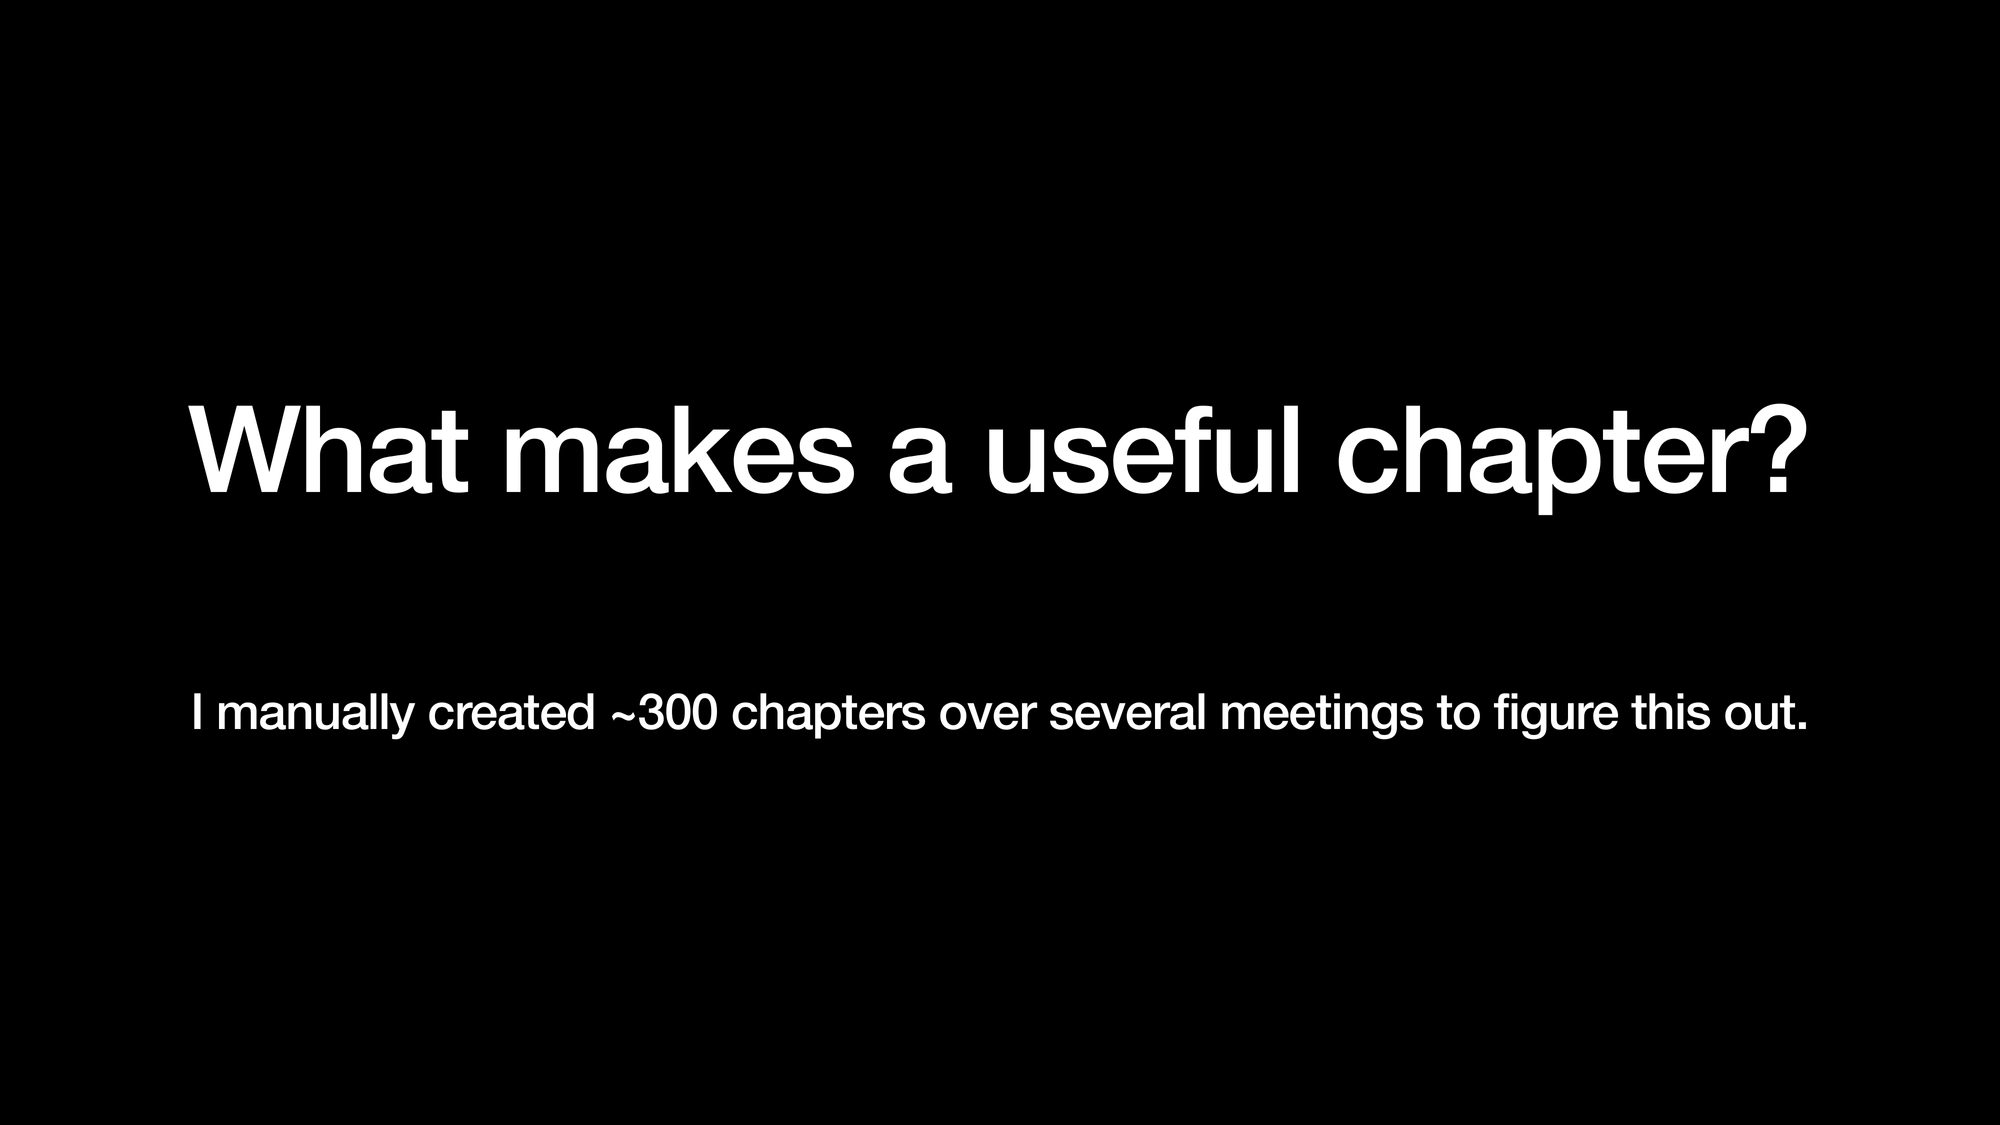 What makes a useful chapter? I manually created ~300 chapters over several meetings to figure this out.